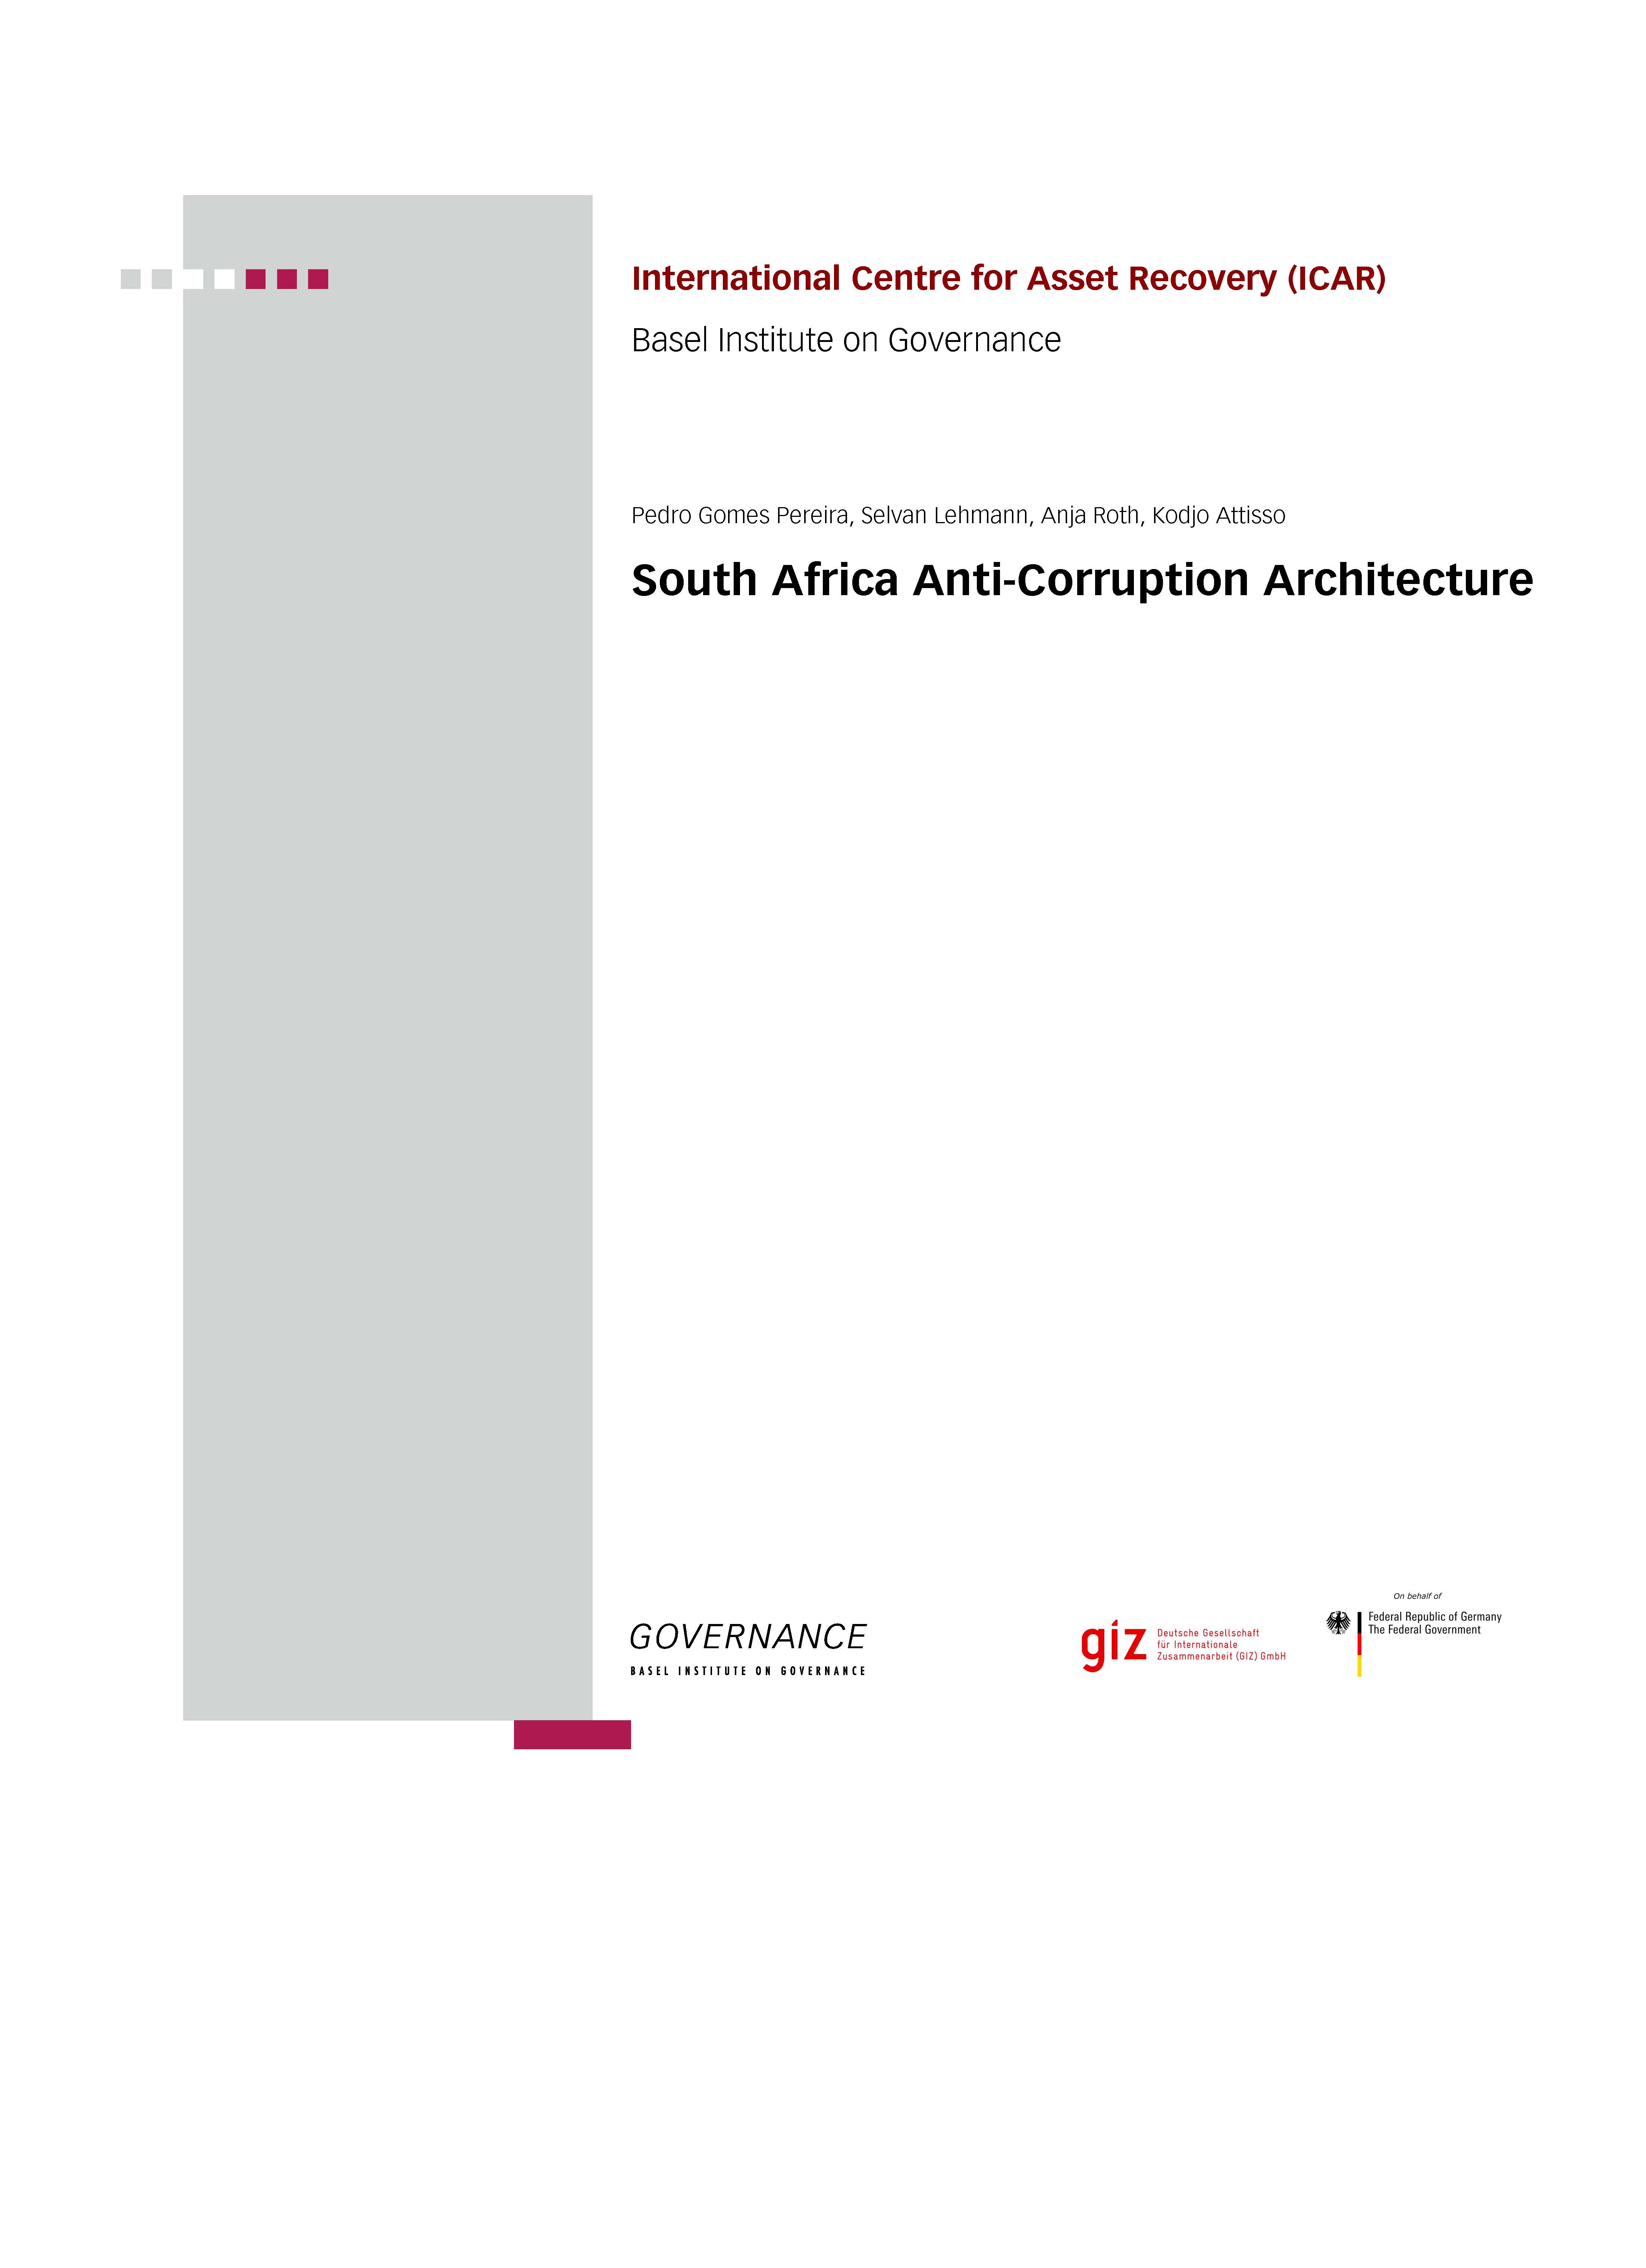 Cover of South Africa Anti-Corruption Architecture report